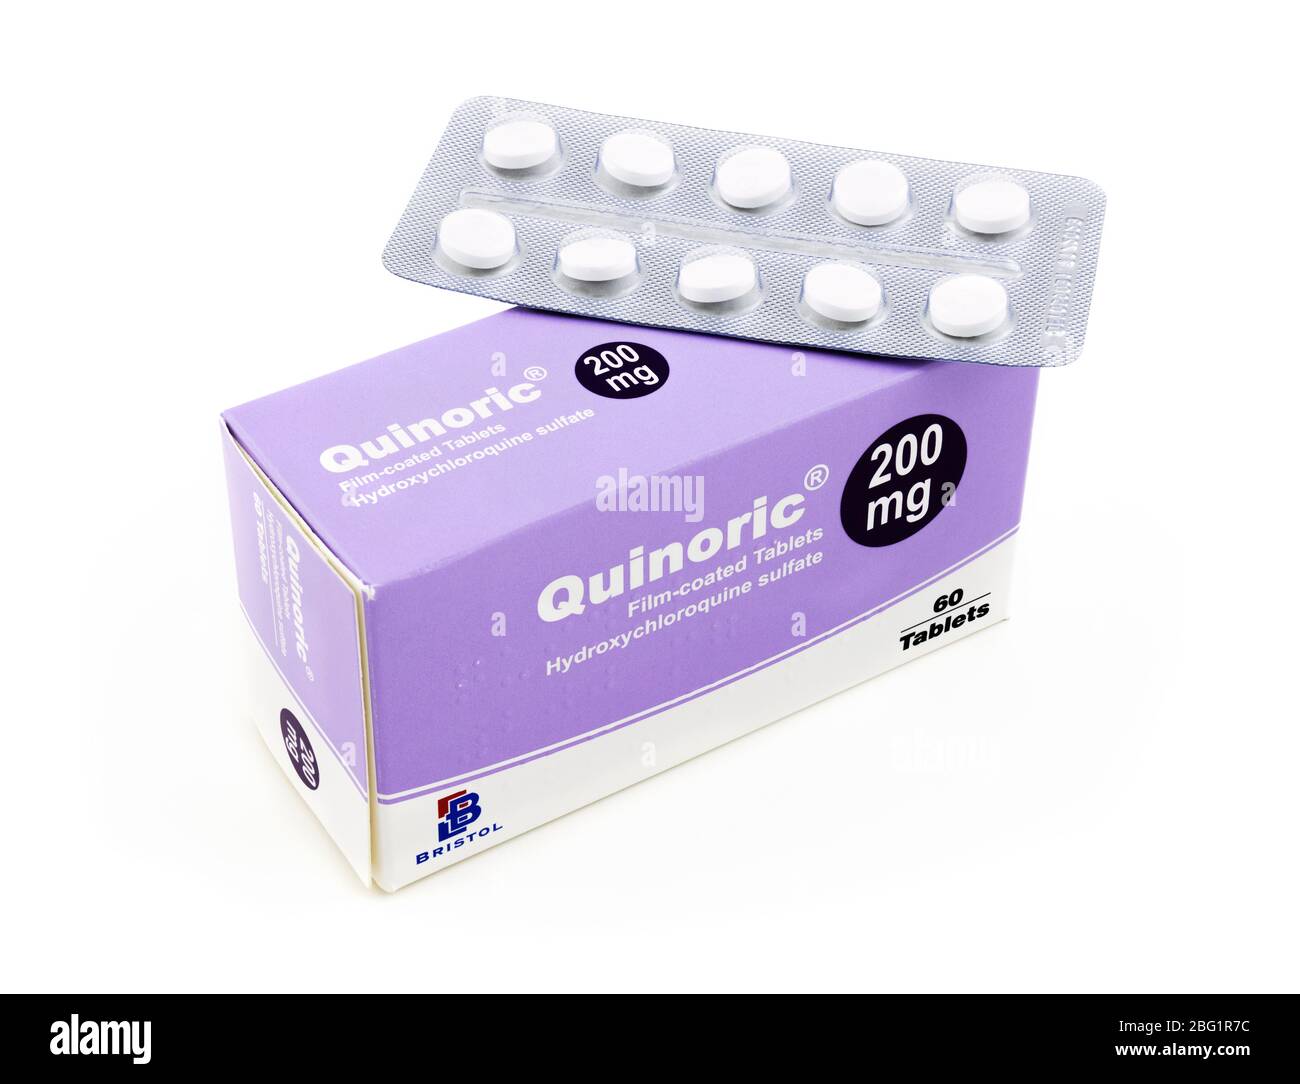 Hydroxychloroquine 200mg tablets Hydroxychloroquine tablets Quinoric tablets formerly Plaquenil tablets possible COVID19 treatment plan Stock Photo